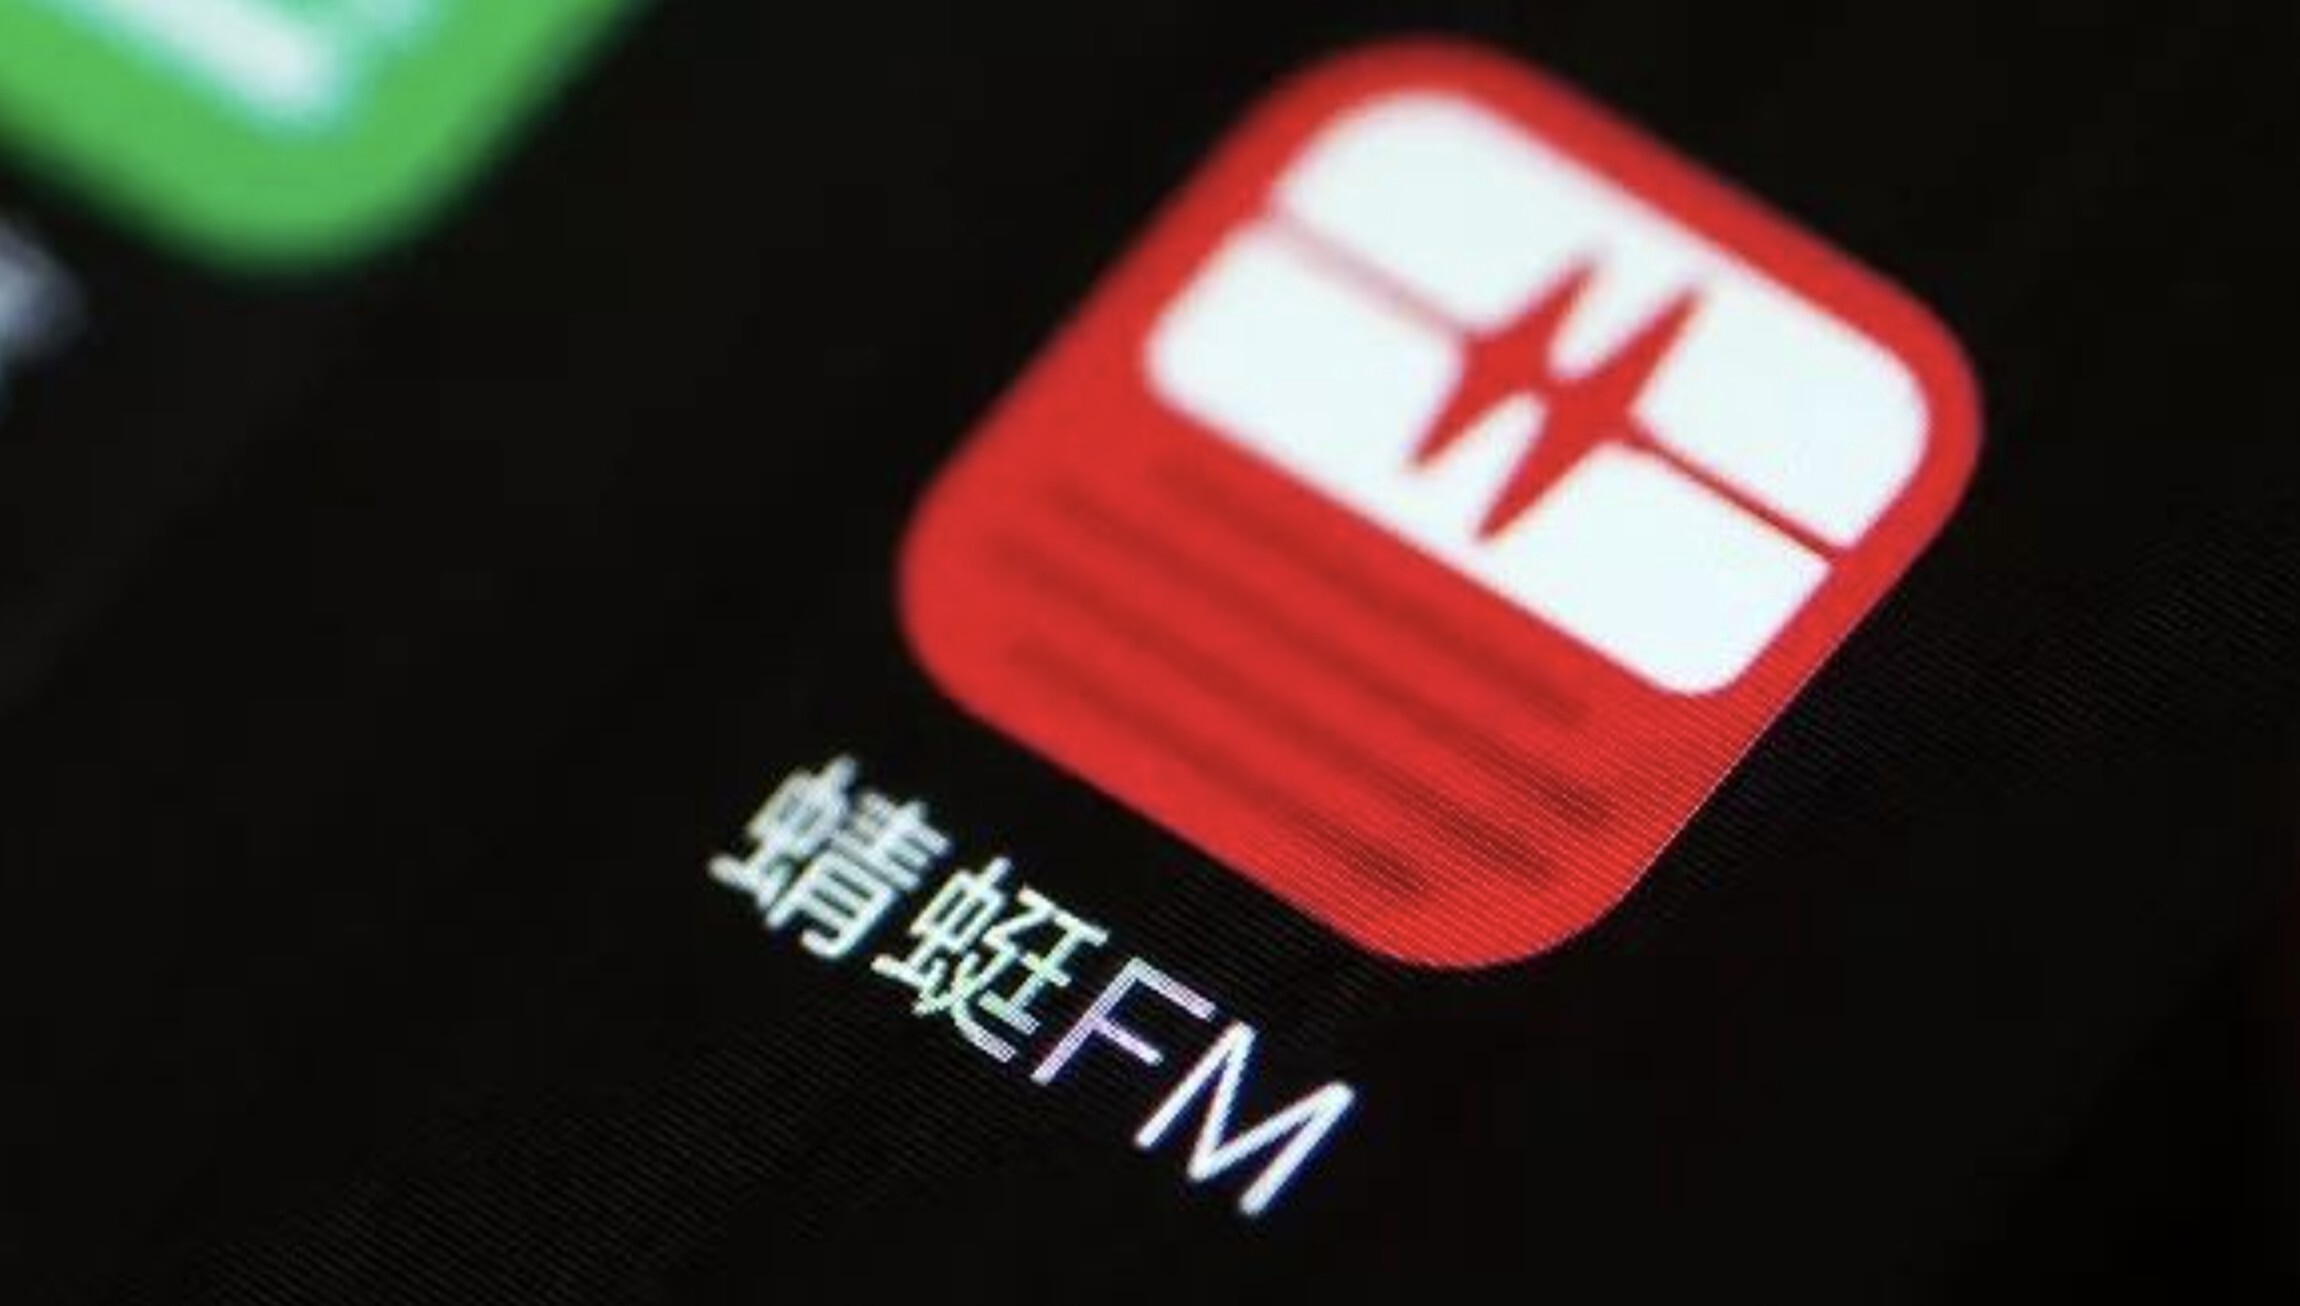 Dragonfly FM, one of China’s biggest podcast platforms, was one of 67 apps removed from app stores this week over practices such as excessive device permissions and pop-ups. Photo: Handout